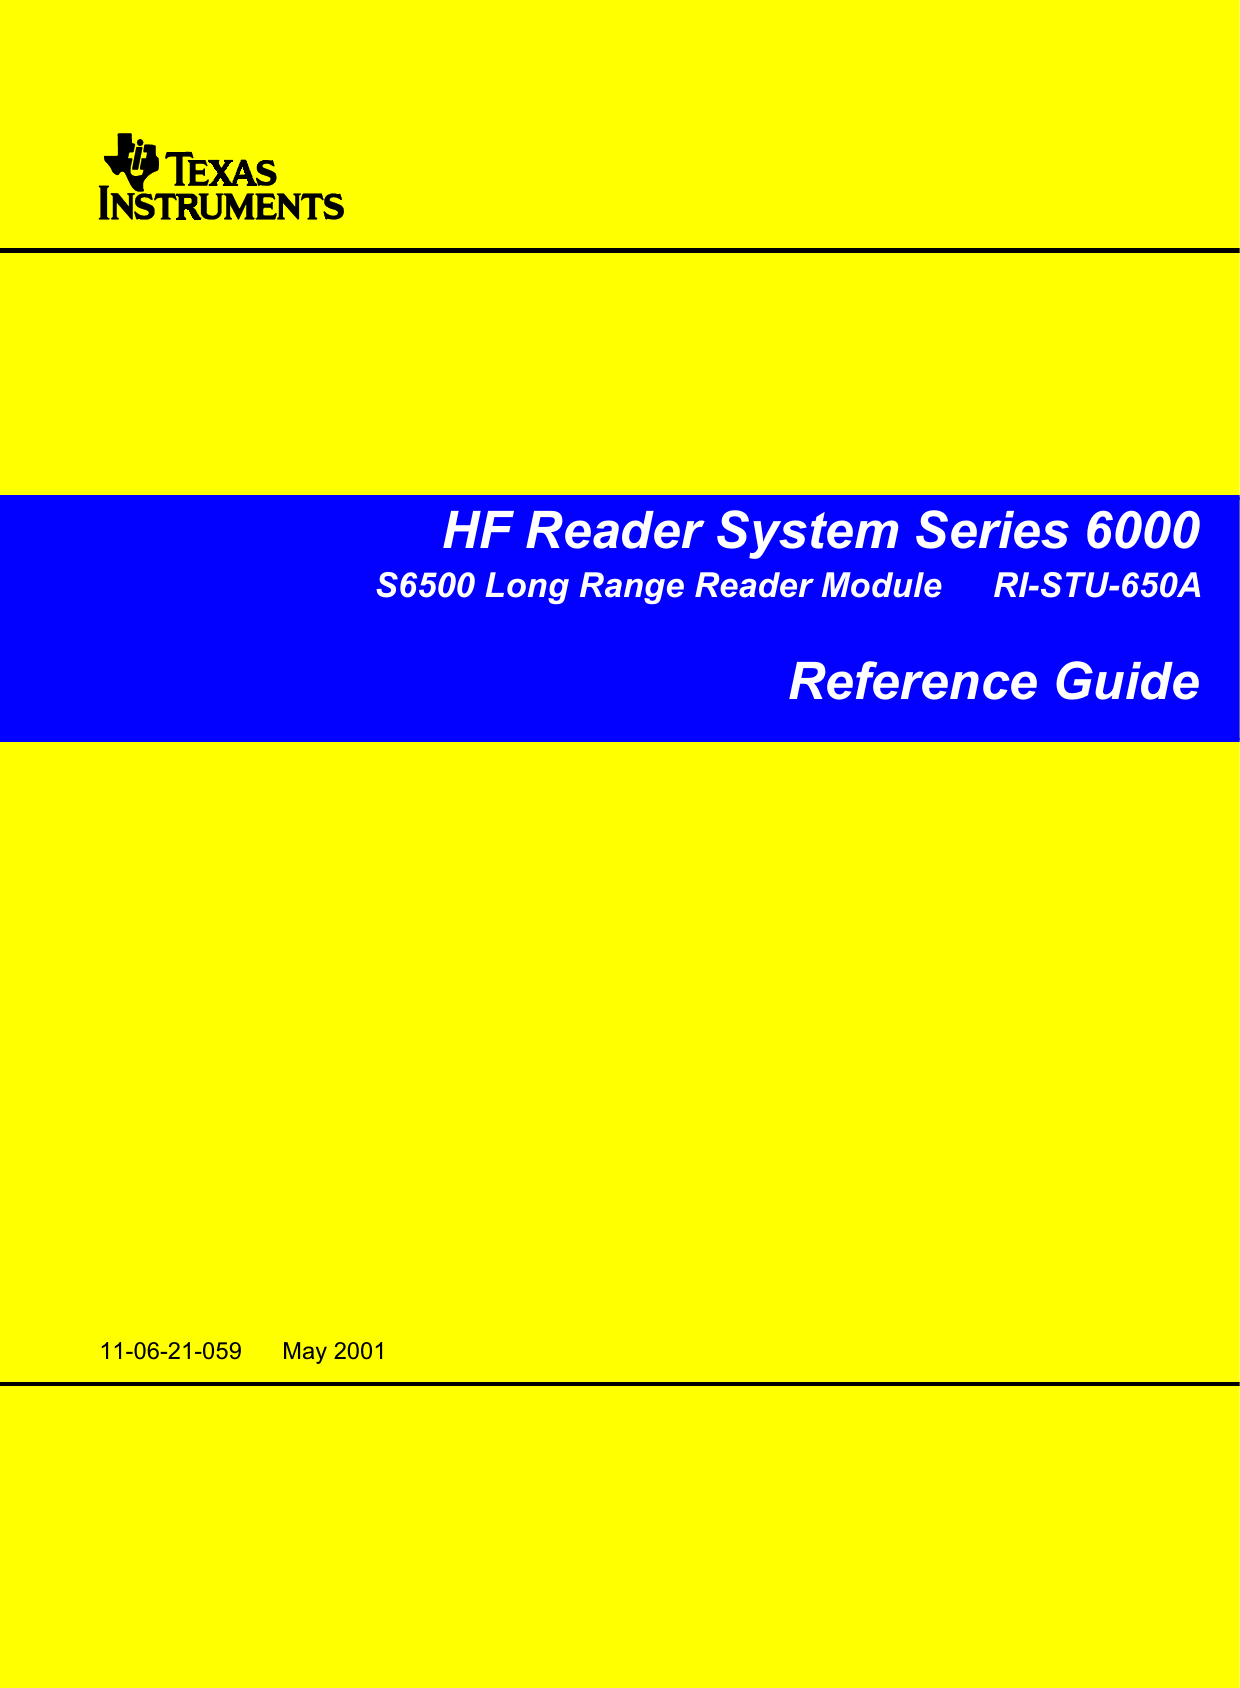 1S6500 Long Range Reader Module - Reference Guide May ’0111-06-21-059  May 2001HF Reader System Series 6000S6500 Long Range Reader Module RI-STU-650AReference Guide